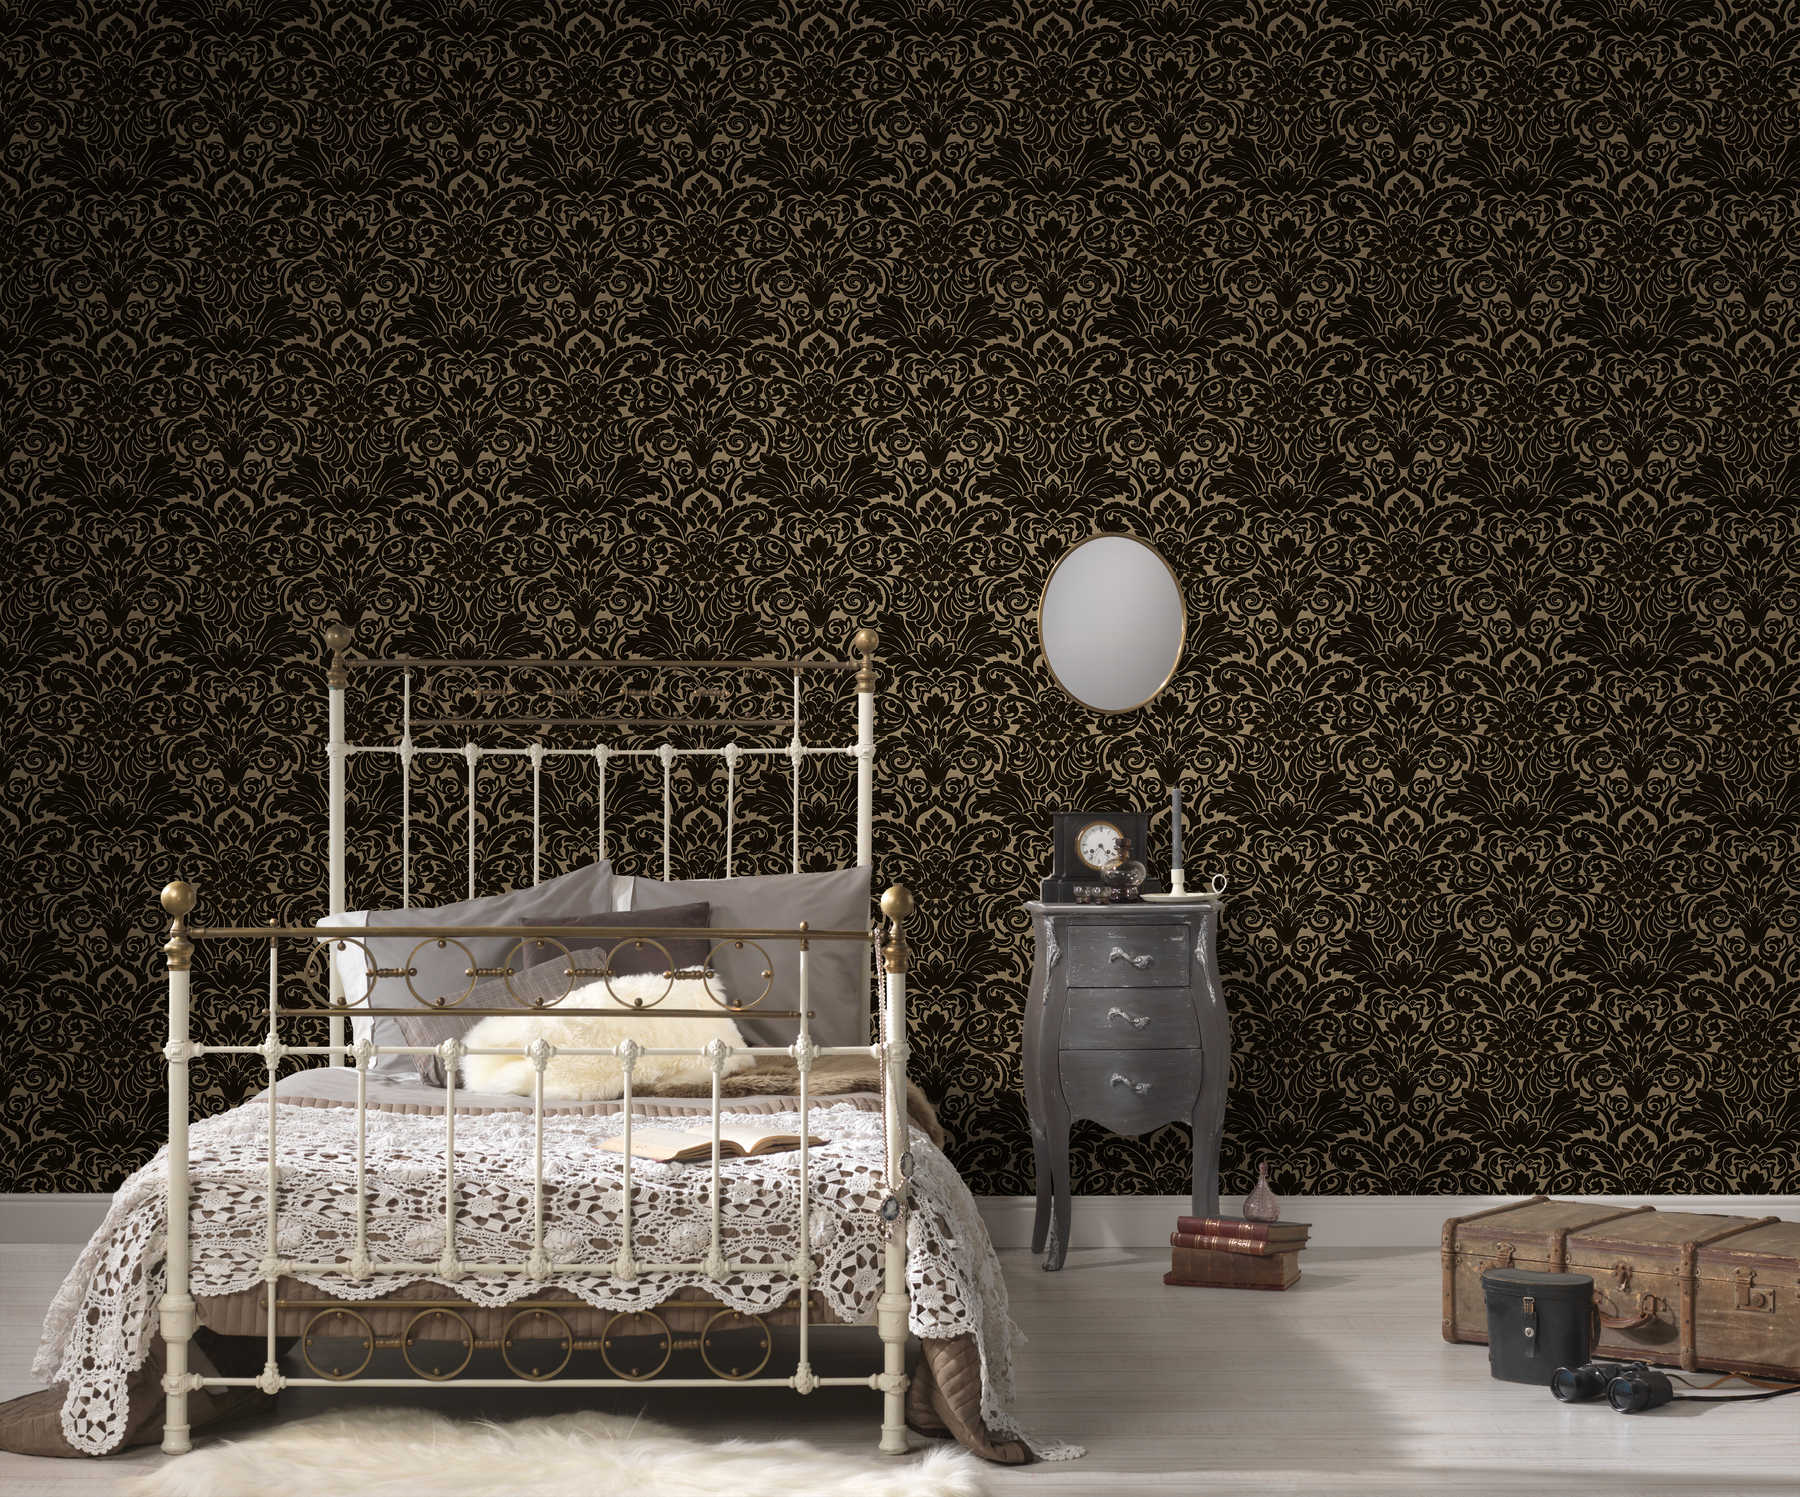             Baroque wallpaper with textile feel & gold effect - black
        